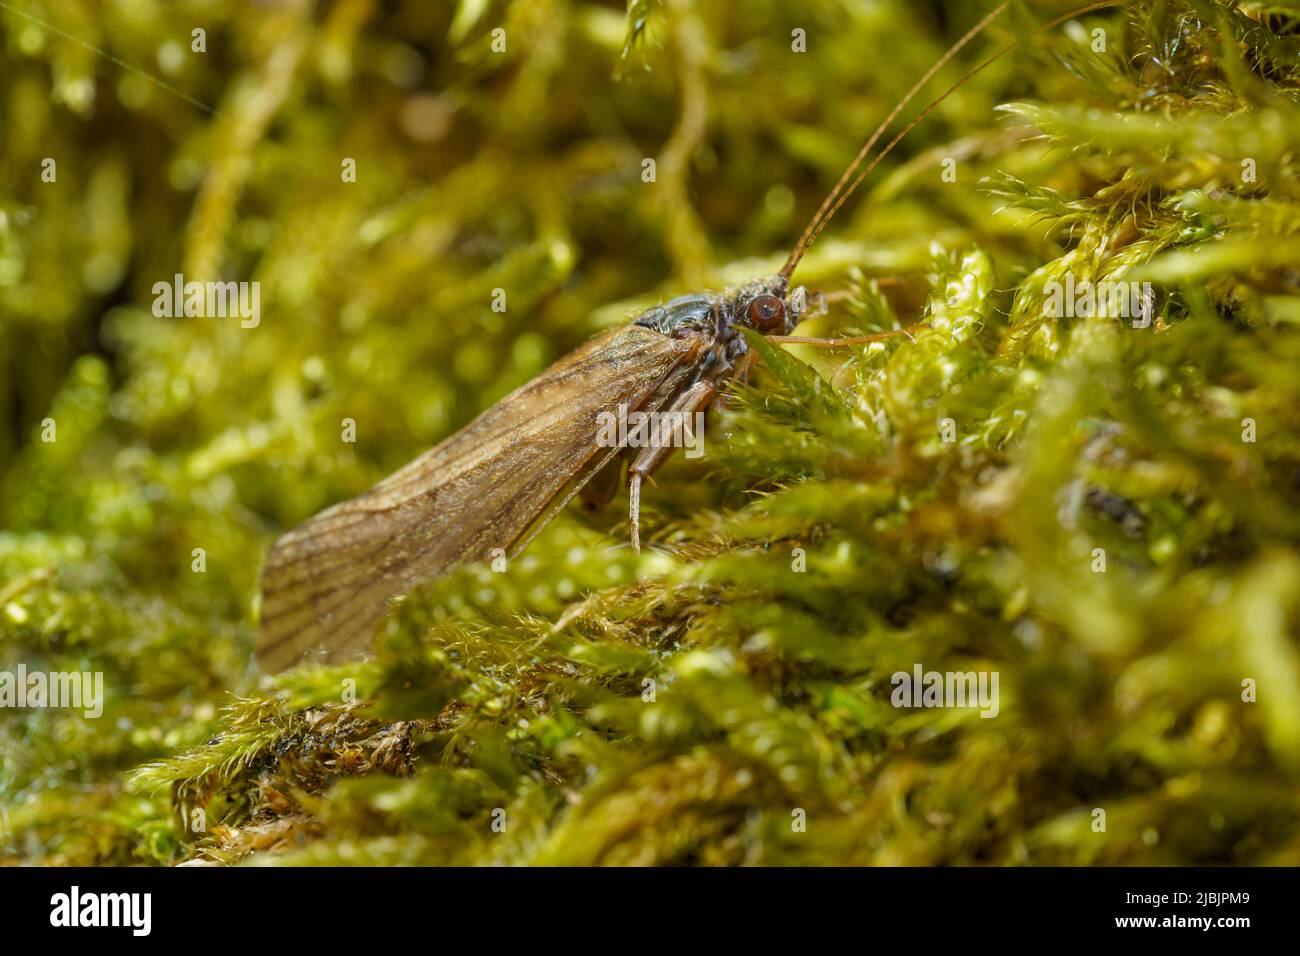 The diamondback moth (Plutella xylostella), sometimes called the cabbage moth, is a moth species of the family Plutellidae. Selective focus image. Stock Photo